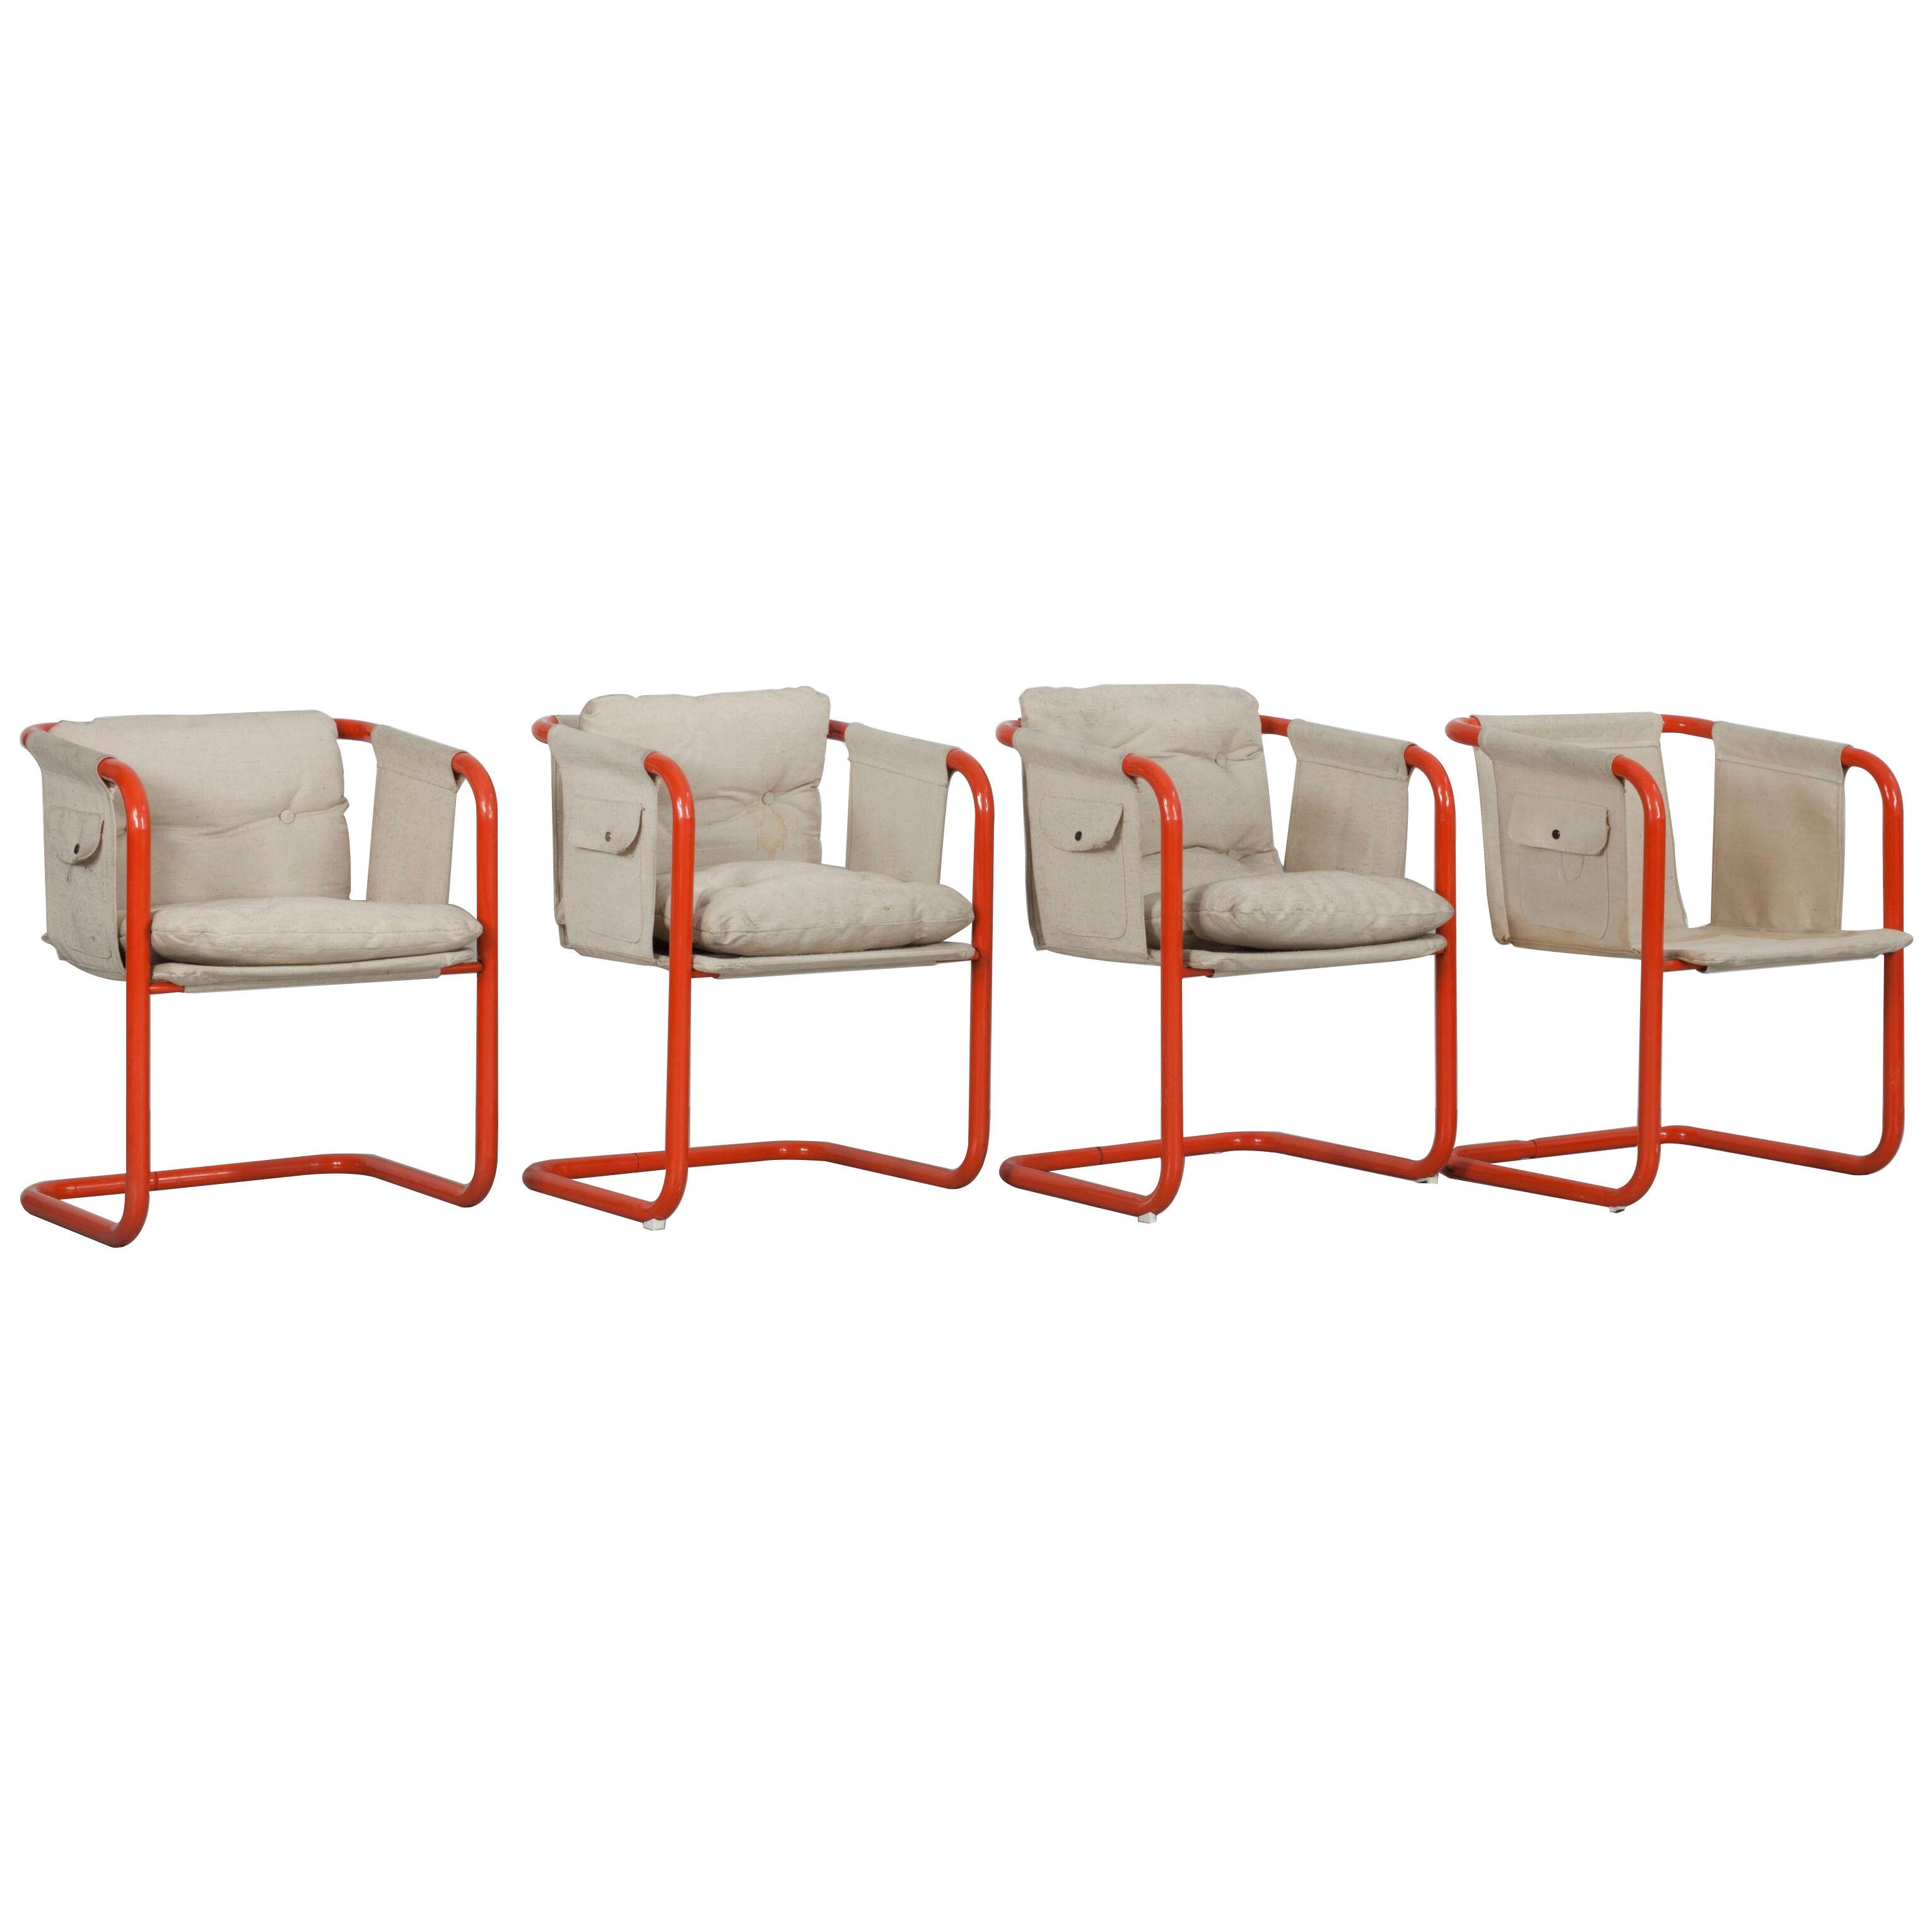 4 Cantilever Armchairs in the Manner of Gae Aulenti, Italy, 1960s